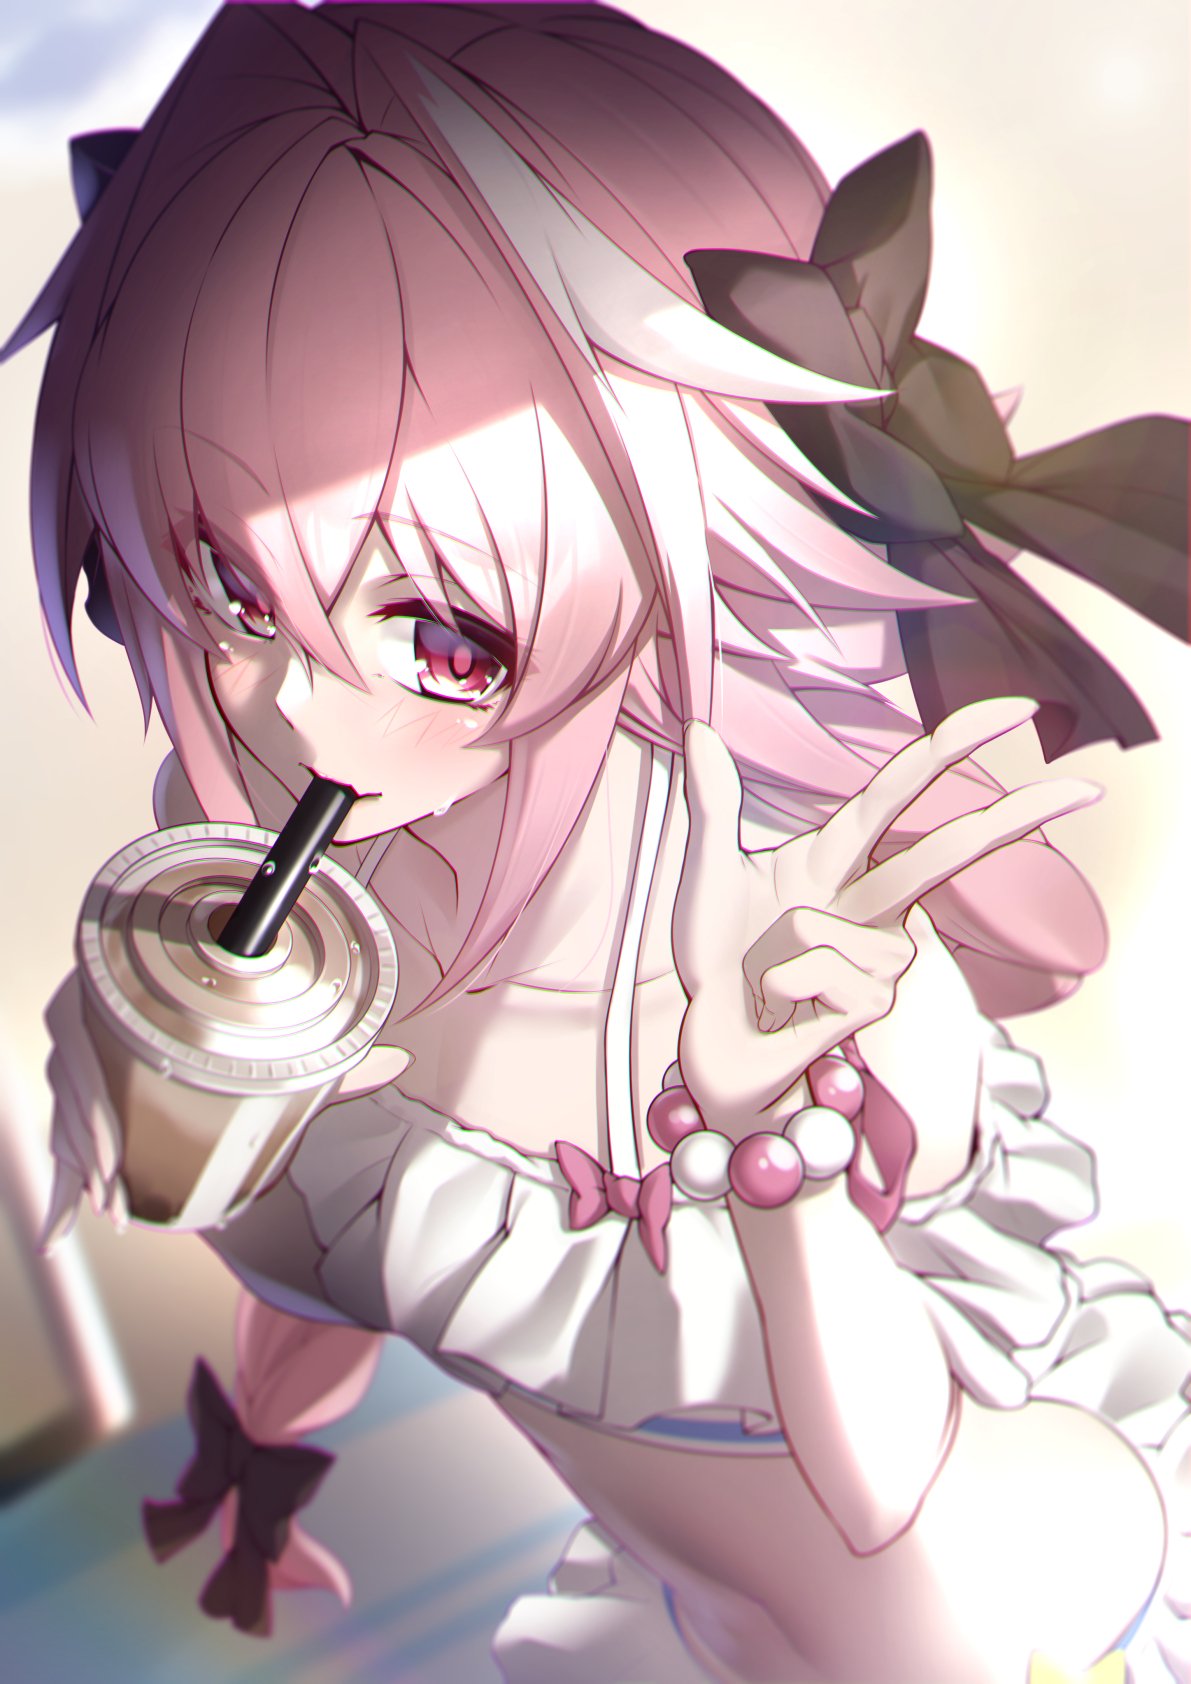 Astolfo doing the peace sign while drinking